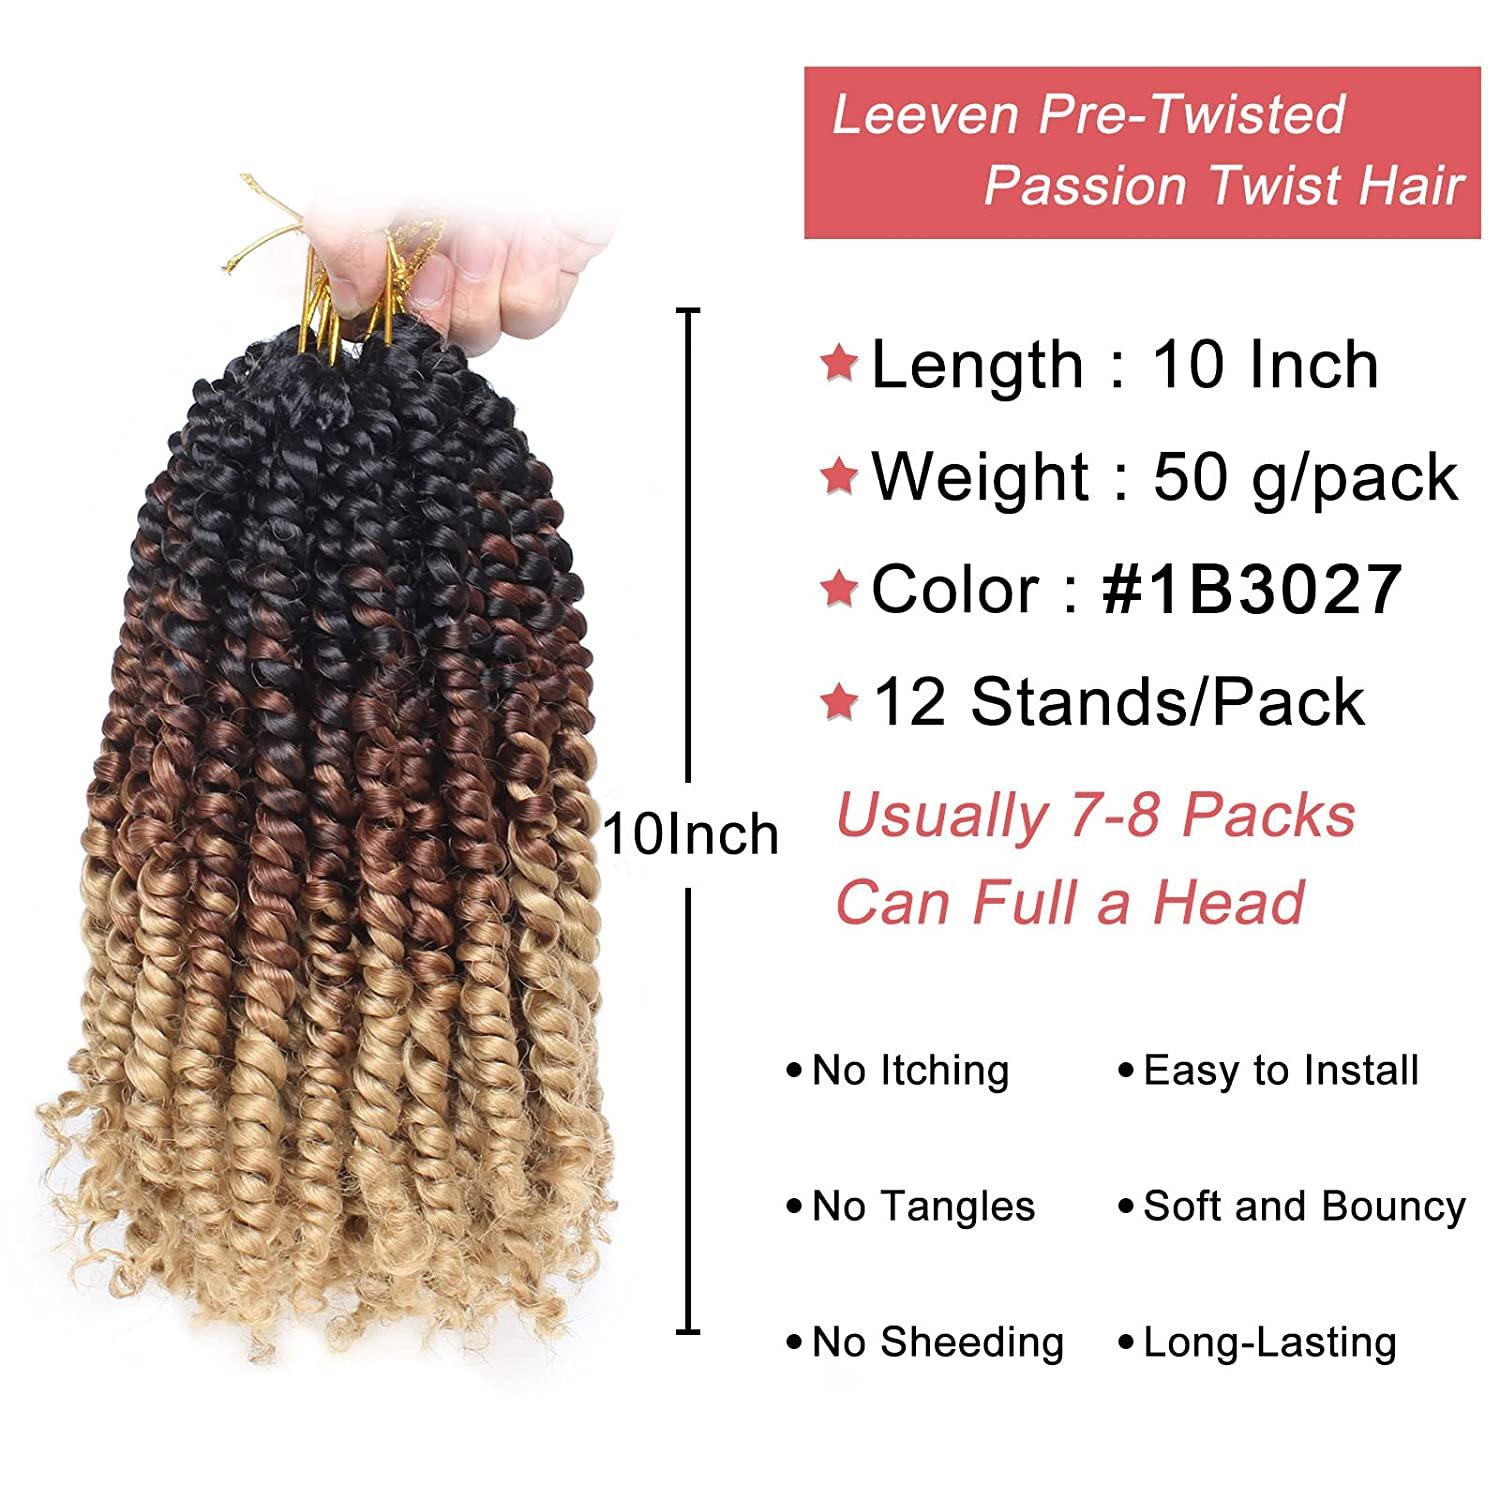 Passion Twist Crochet Hair 10 Inch 8 Packs Pre-twisted Passion